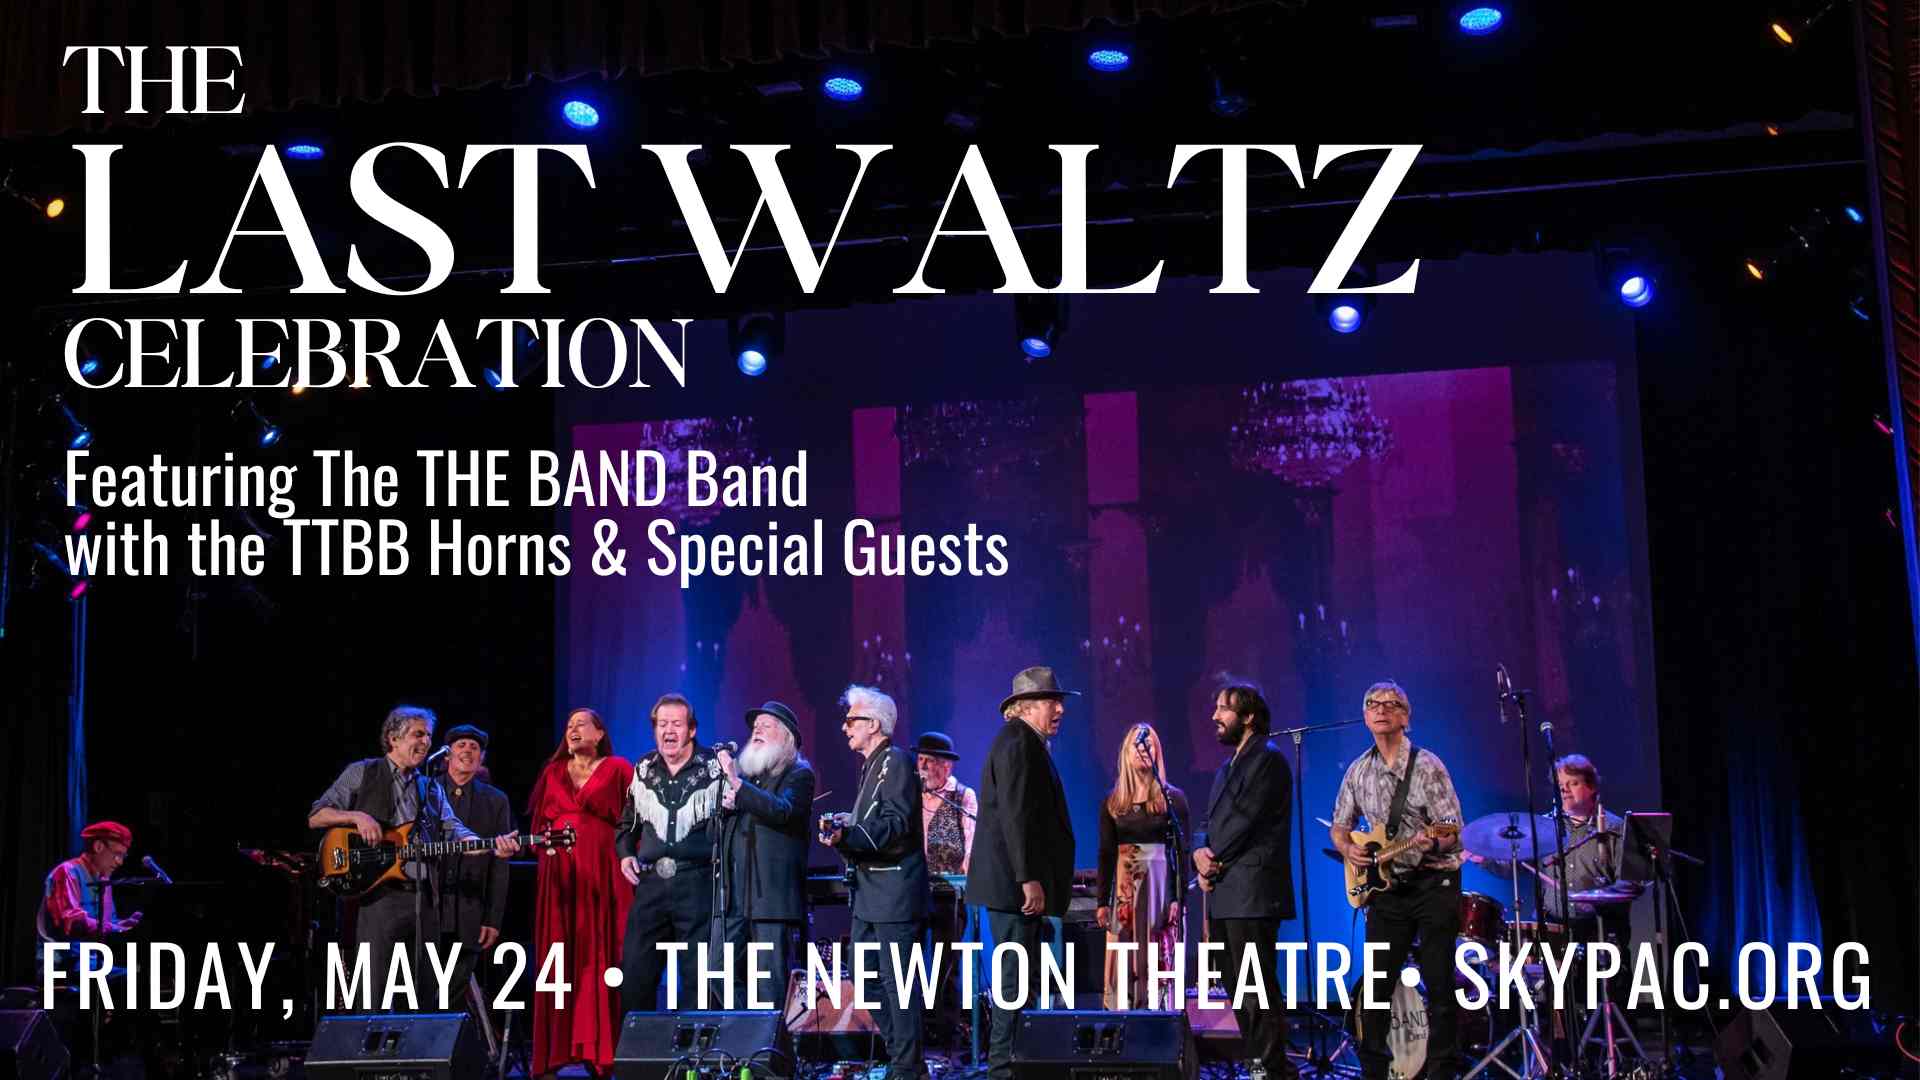 THE LAST WALTZ - The Band The Band at The Newton Theatre